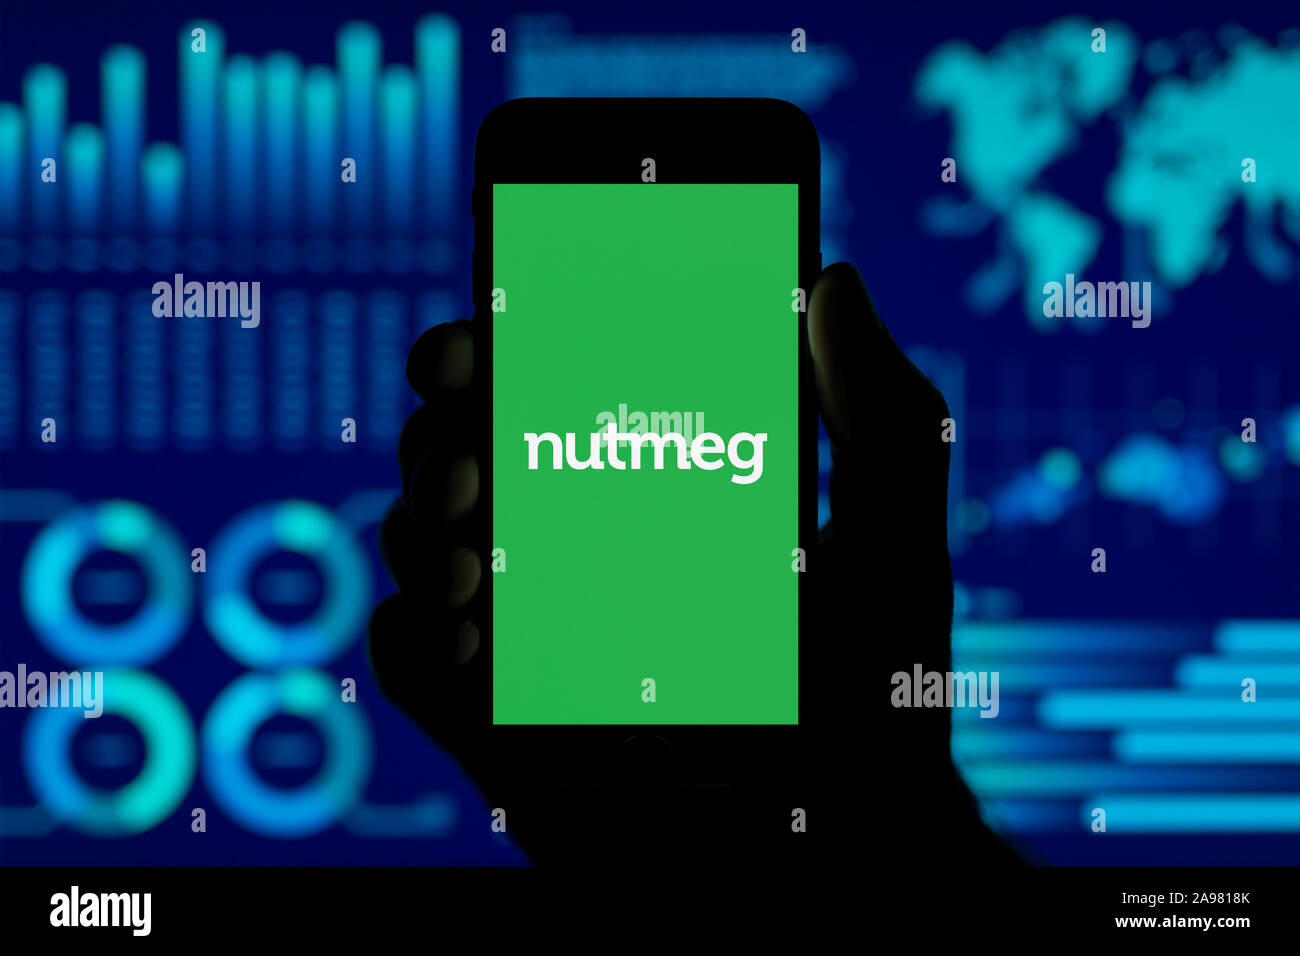 A man holds up an iPhone which displays the Nutmeg logo, shot against a data visualisation style background (Editorial use only). Stock Photo